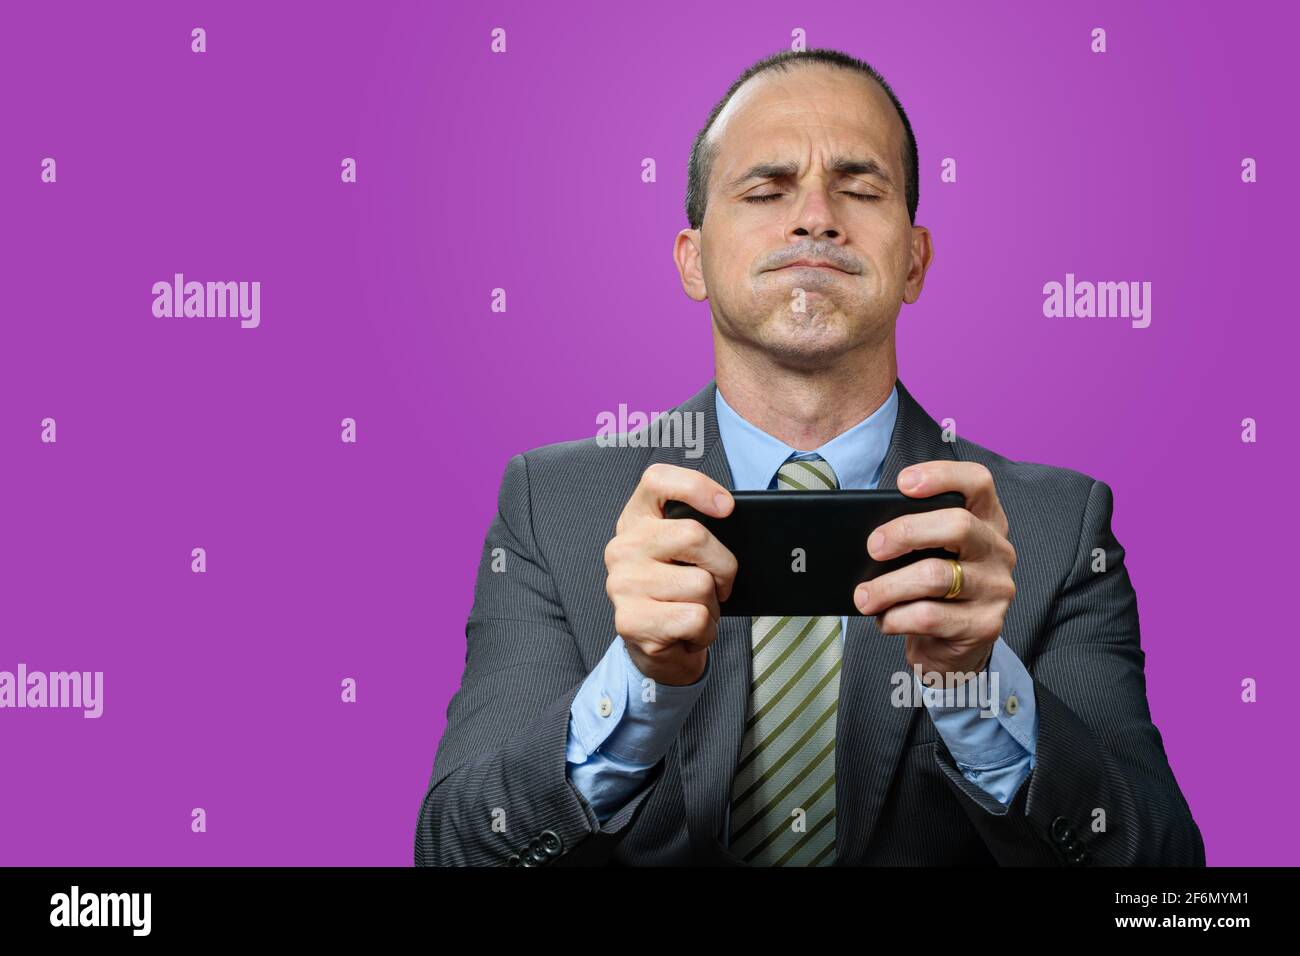 Mature man with suit and tie, holding his smartphone horizontally, breathing out through his nose and with his eyes closed. Purple background. Purple Stock Photo